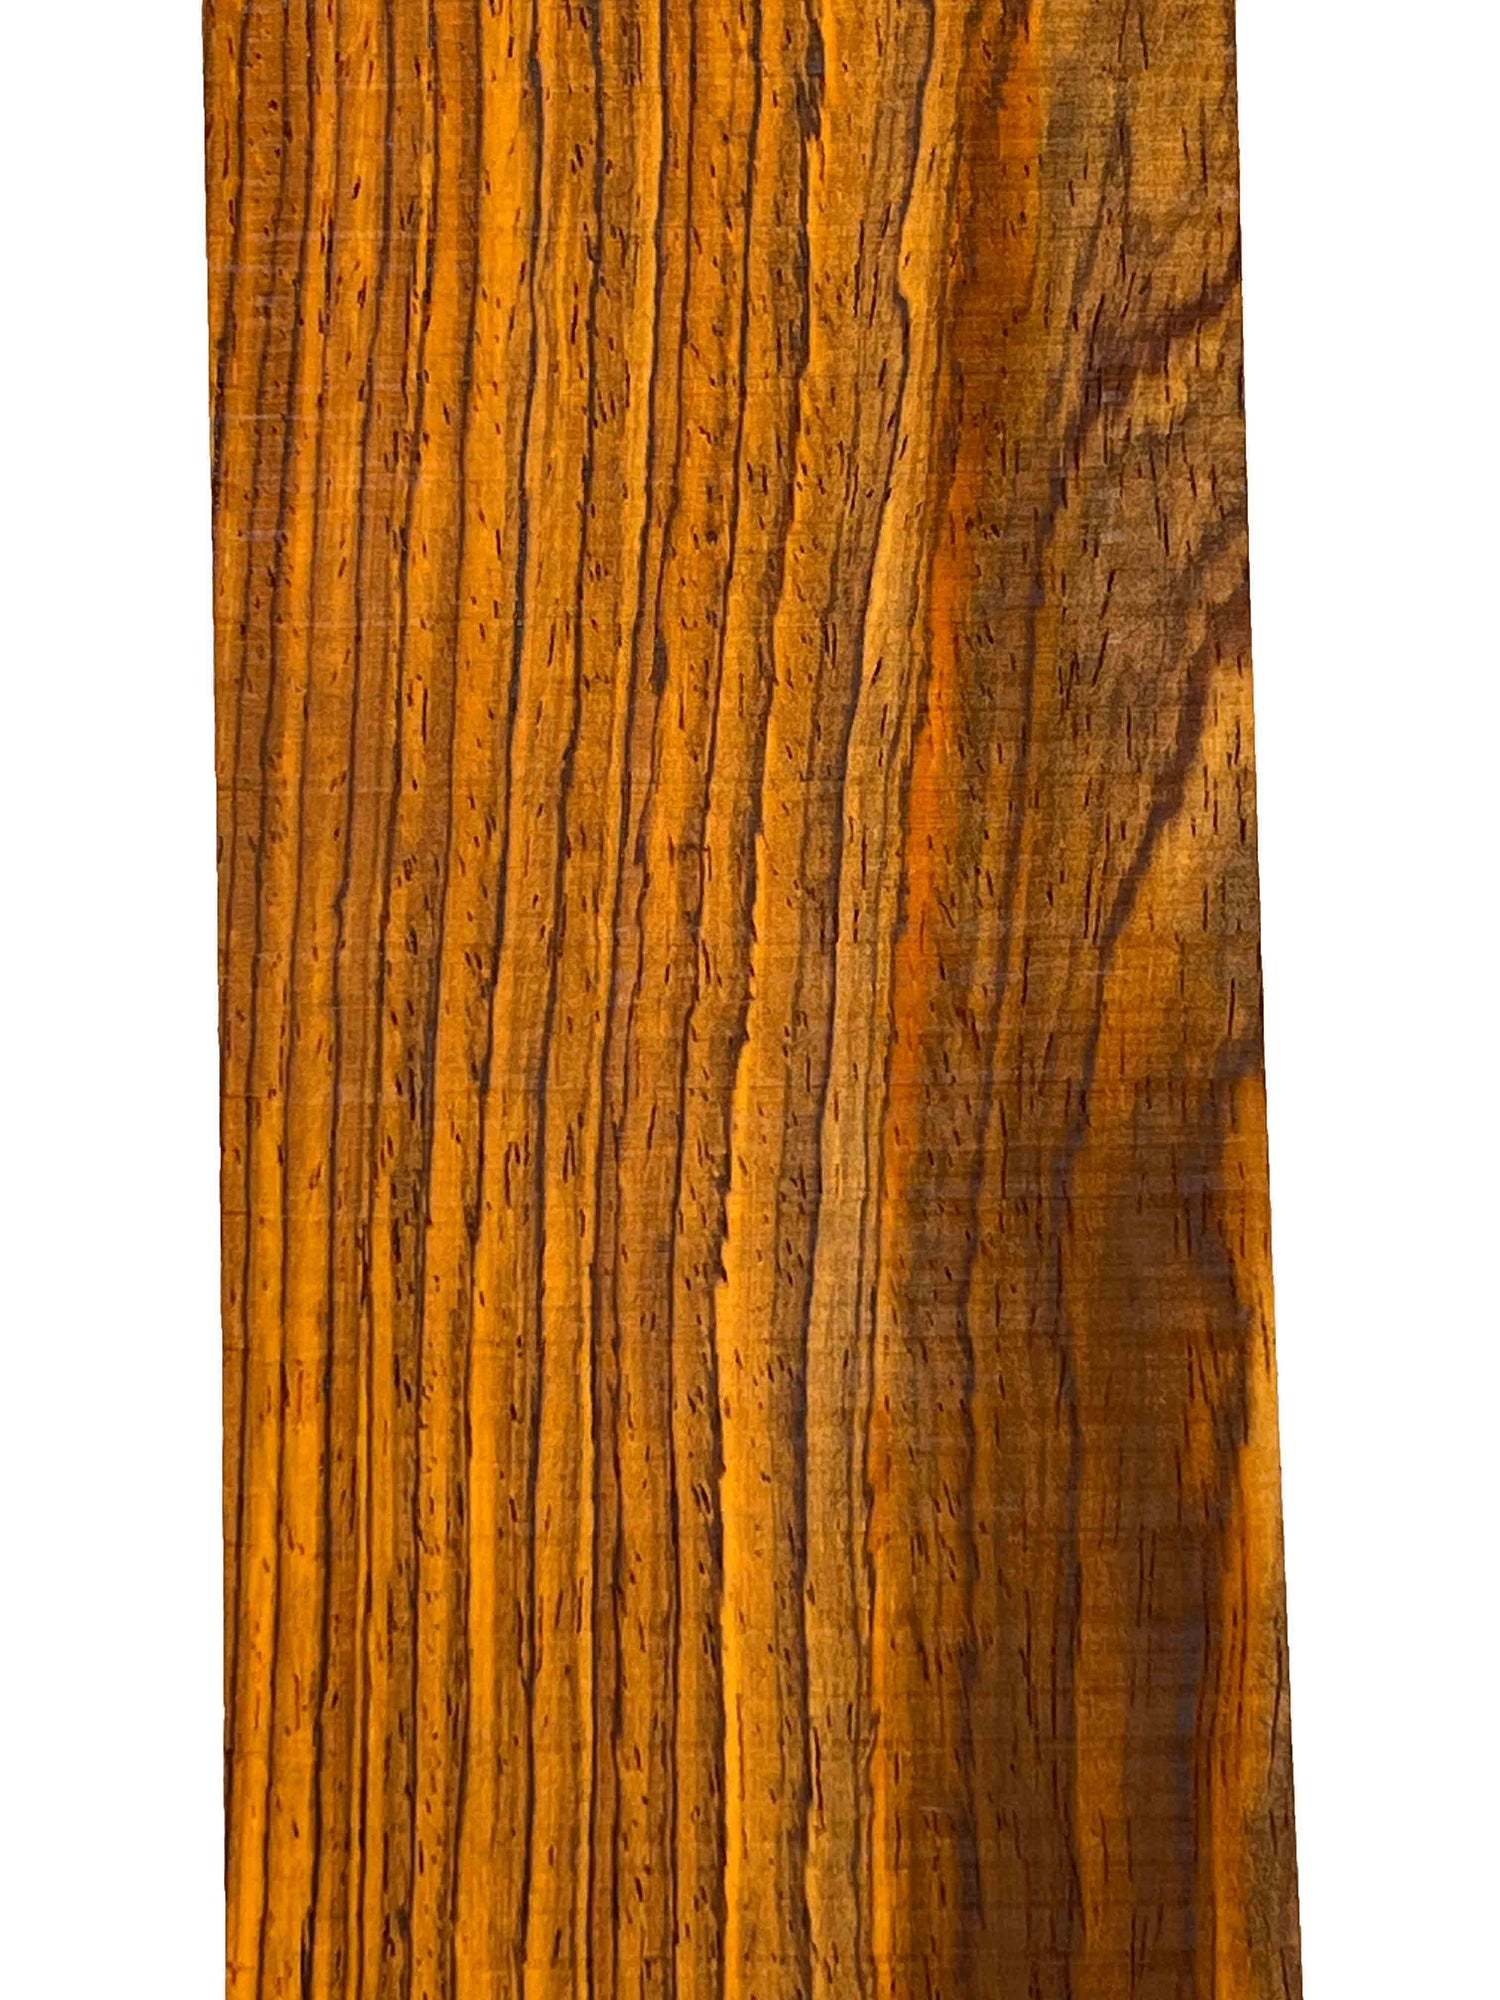 Cocobolo Thin Stock Lumber Boards Wood Crafts -Exotic Wood Zone